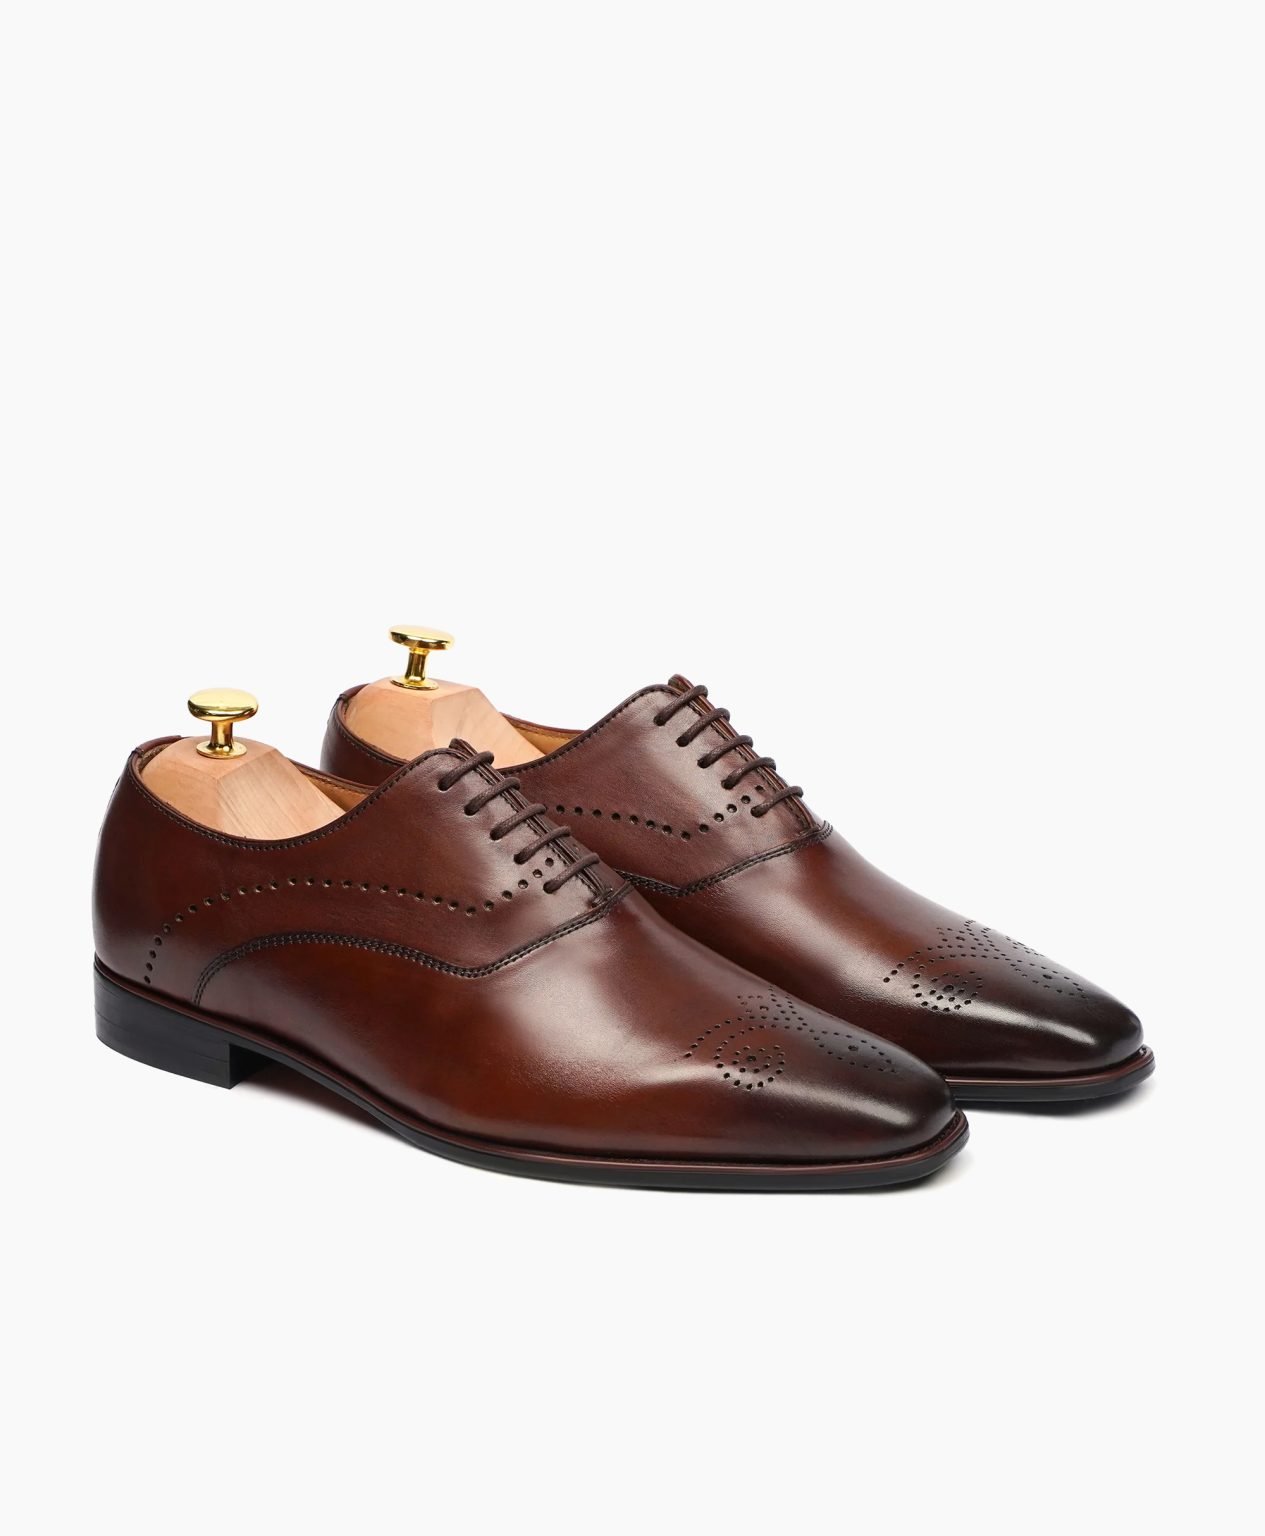 macclesfield-oxford-reddish-brown-leather-shoes-image200